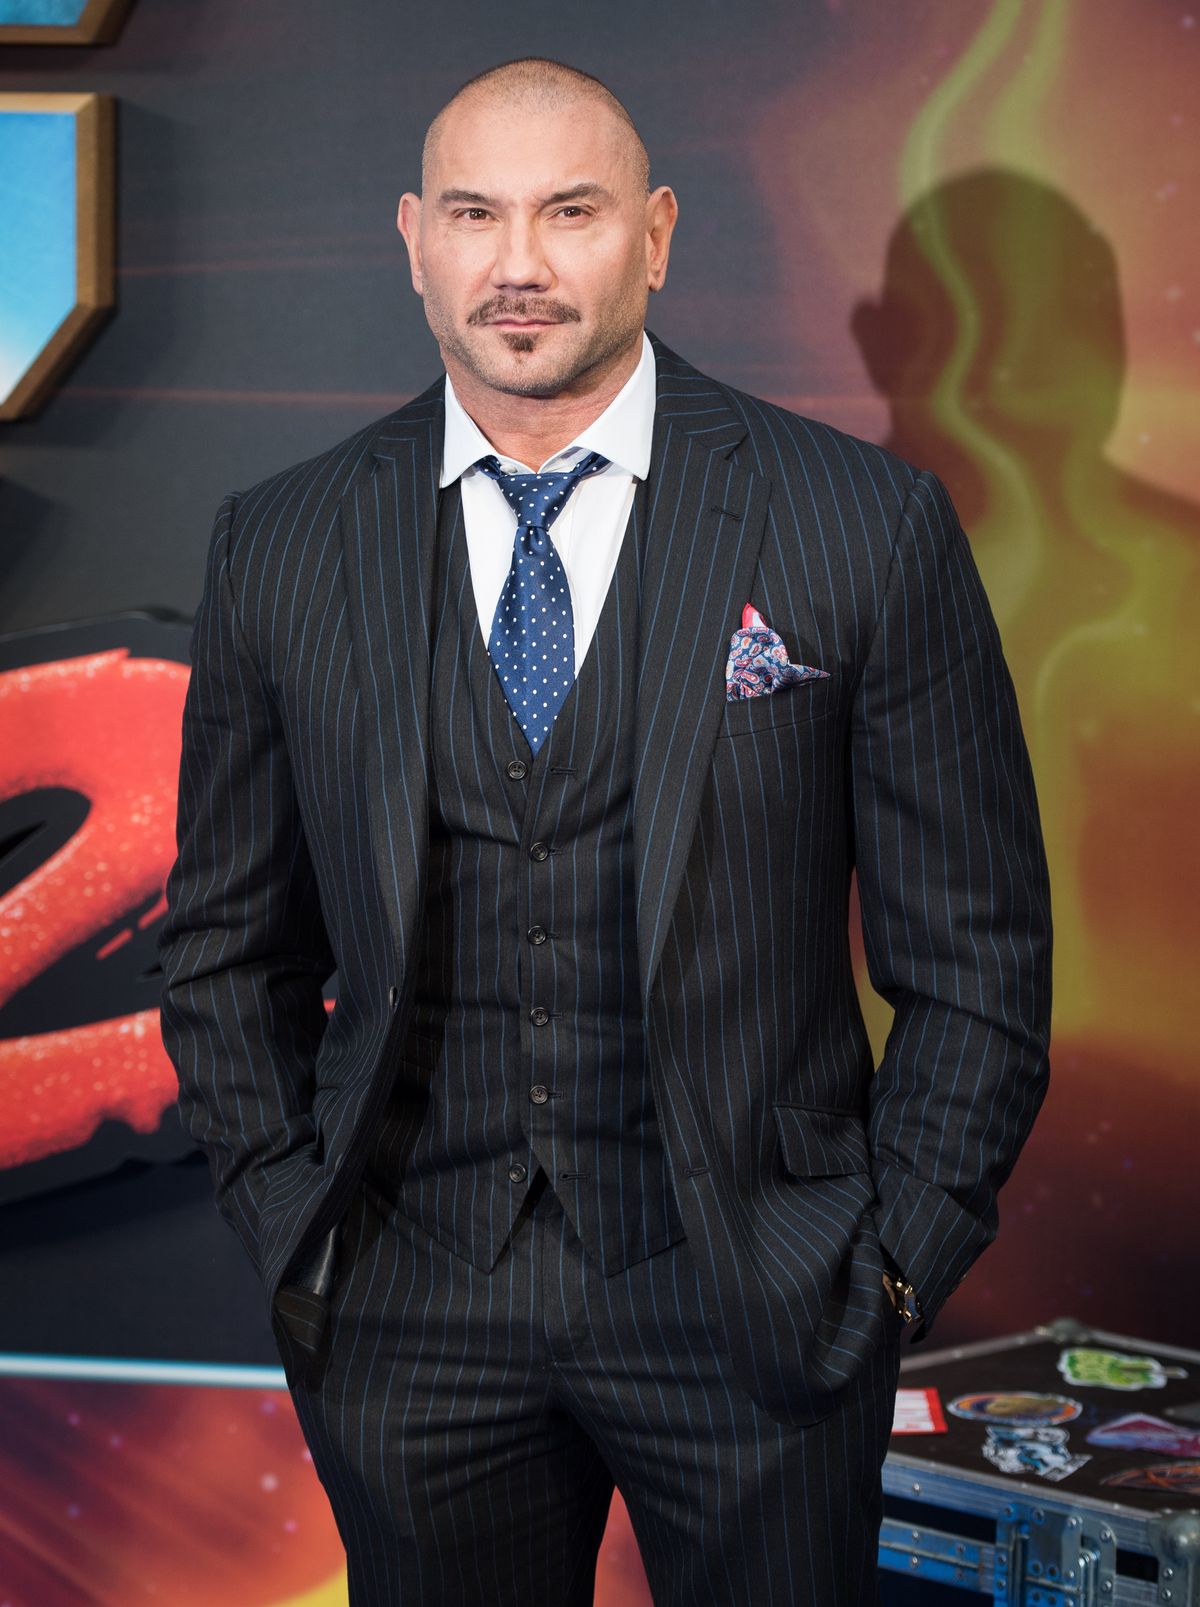 Dave Bautista at the Guardians of the Galaxy Vol 2 premiere